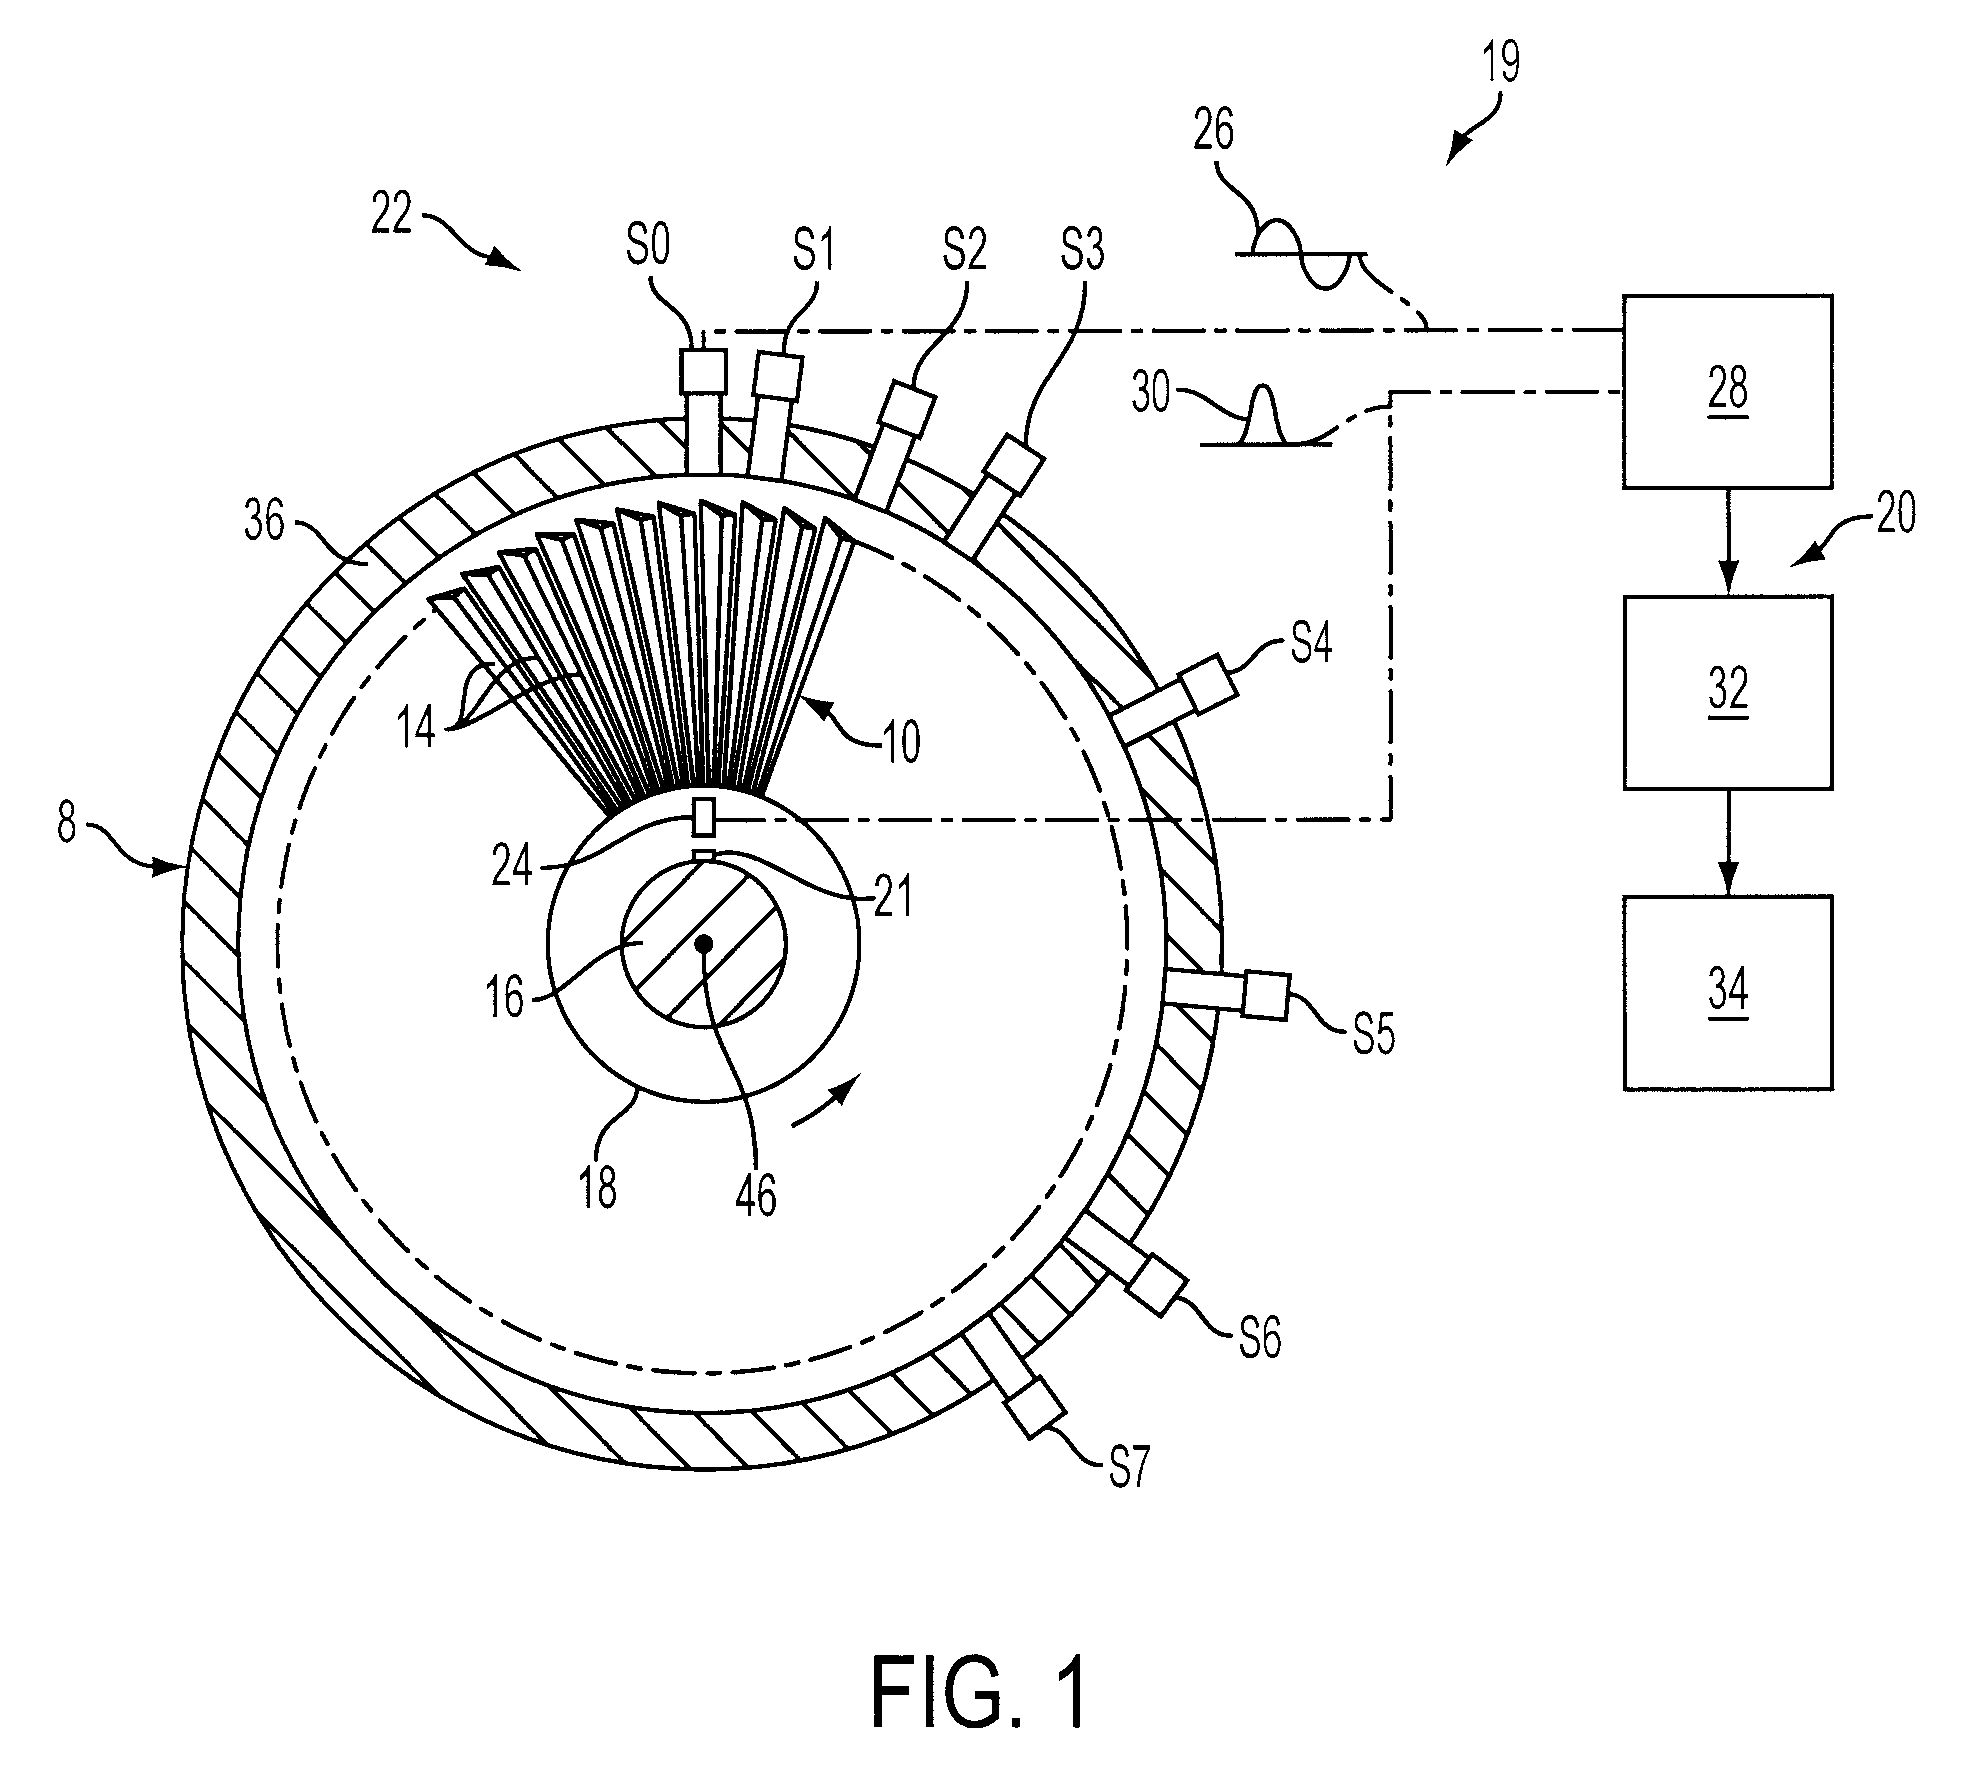 Method of analyzing non-synchronous vibrations using a dispersed array multi-probe machine